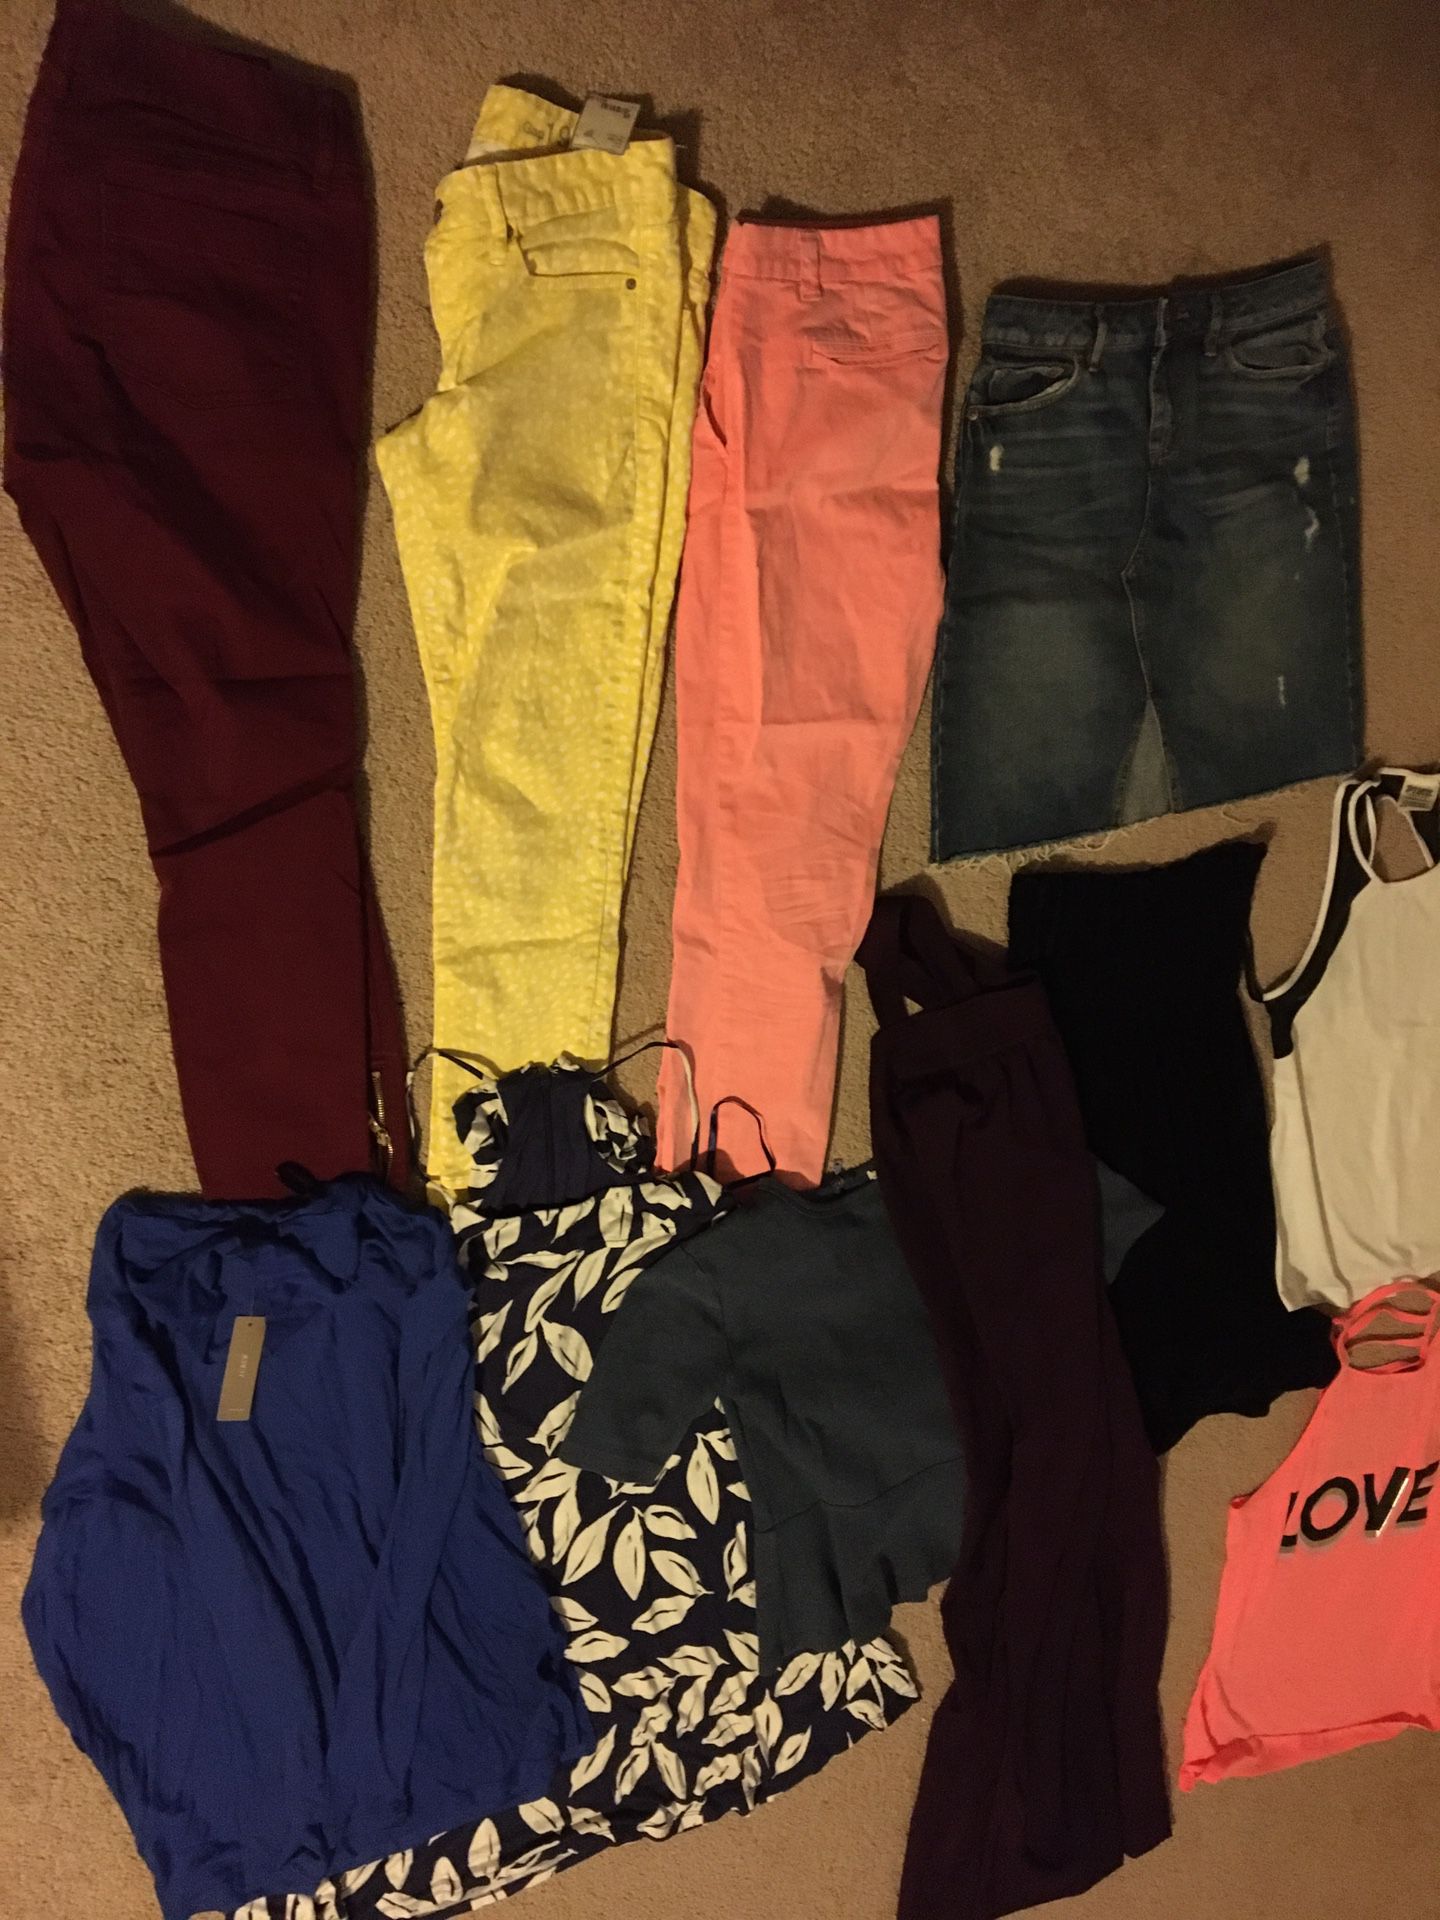 Lot of women’s clothes, purses, shoes, scarves and more